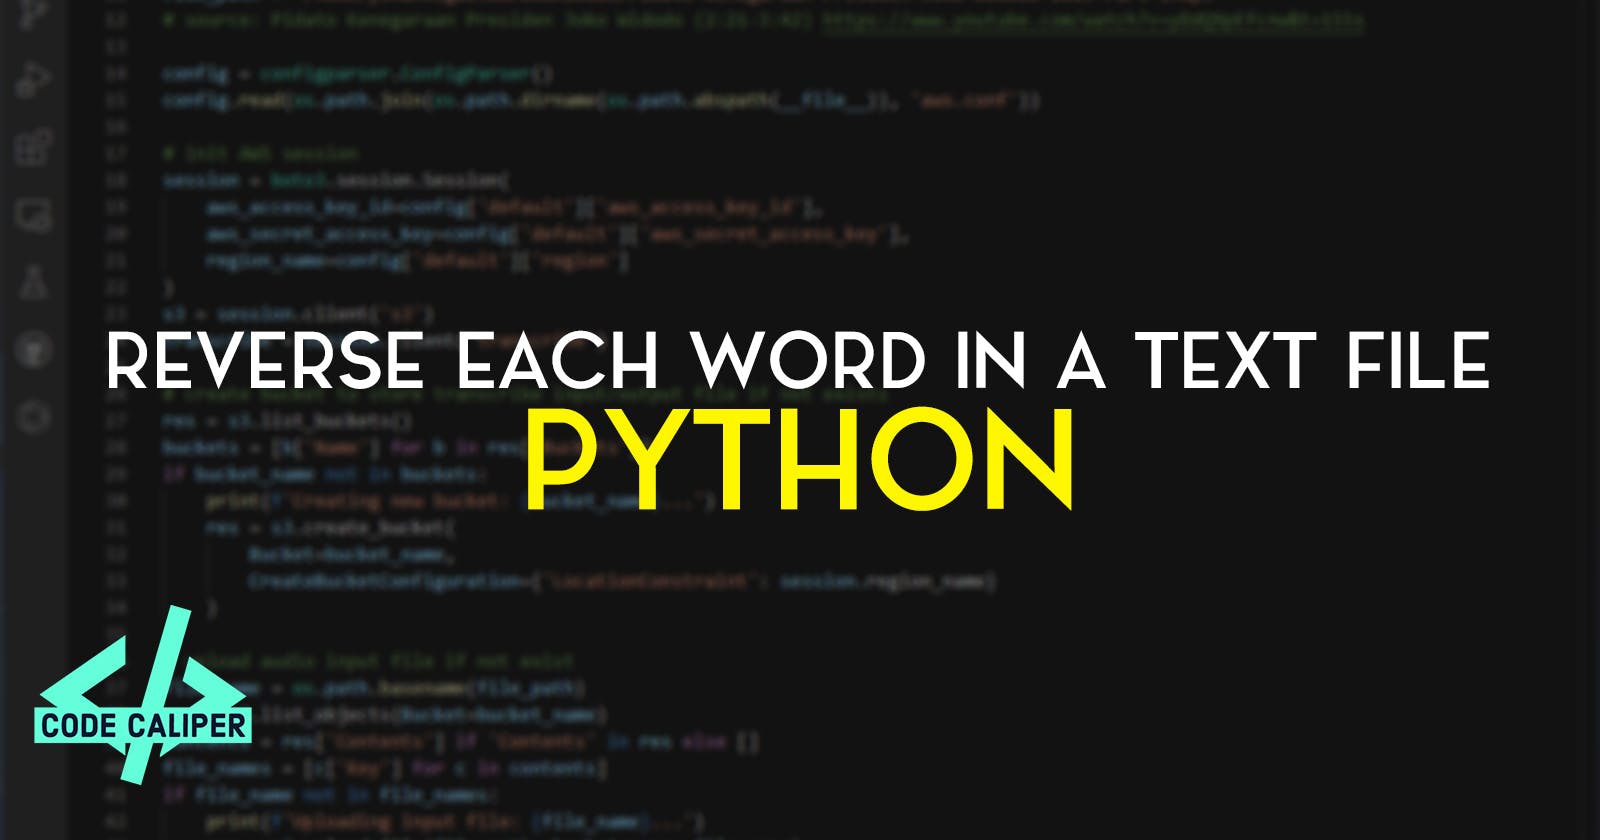 Python Program to Reverse Each Word in a Text File